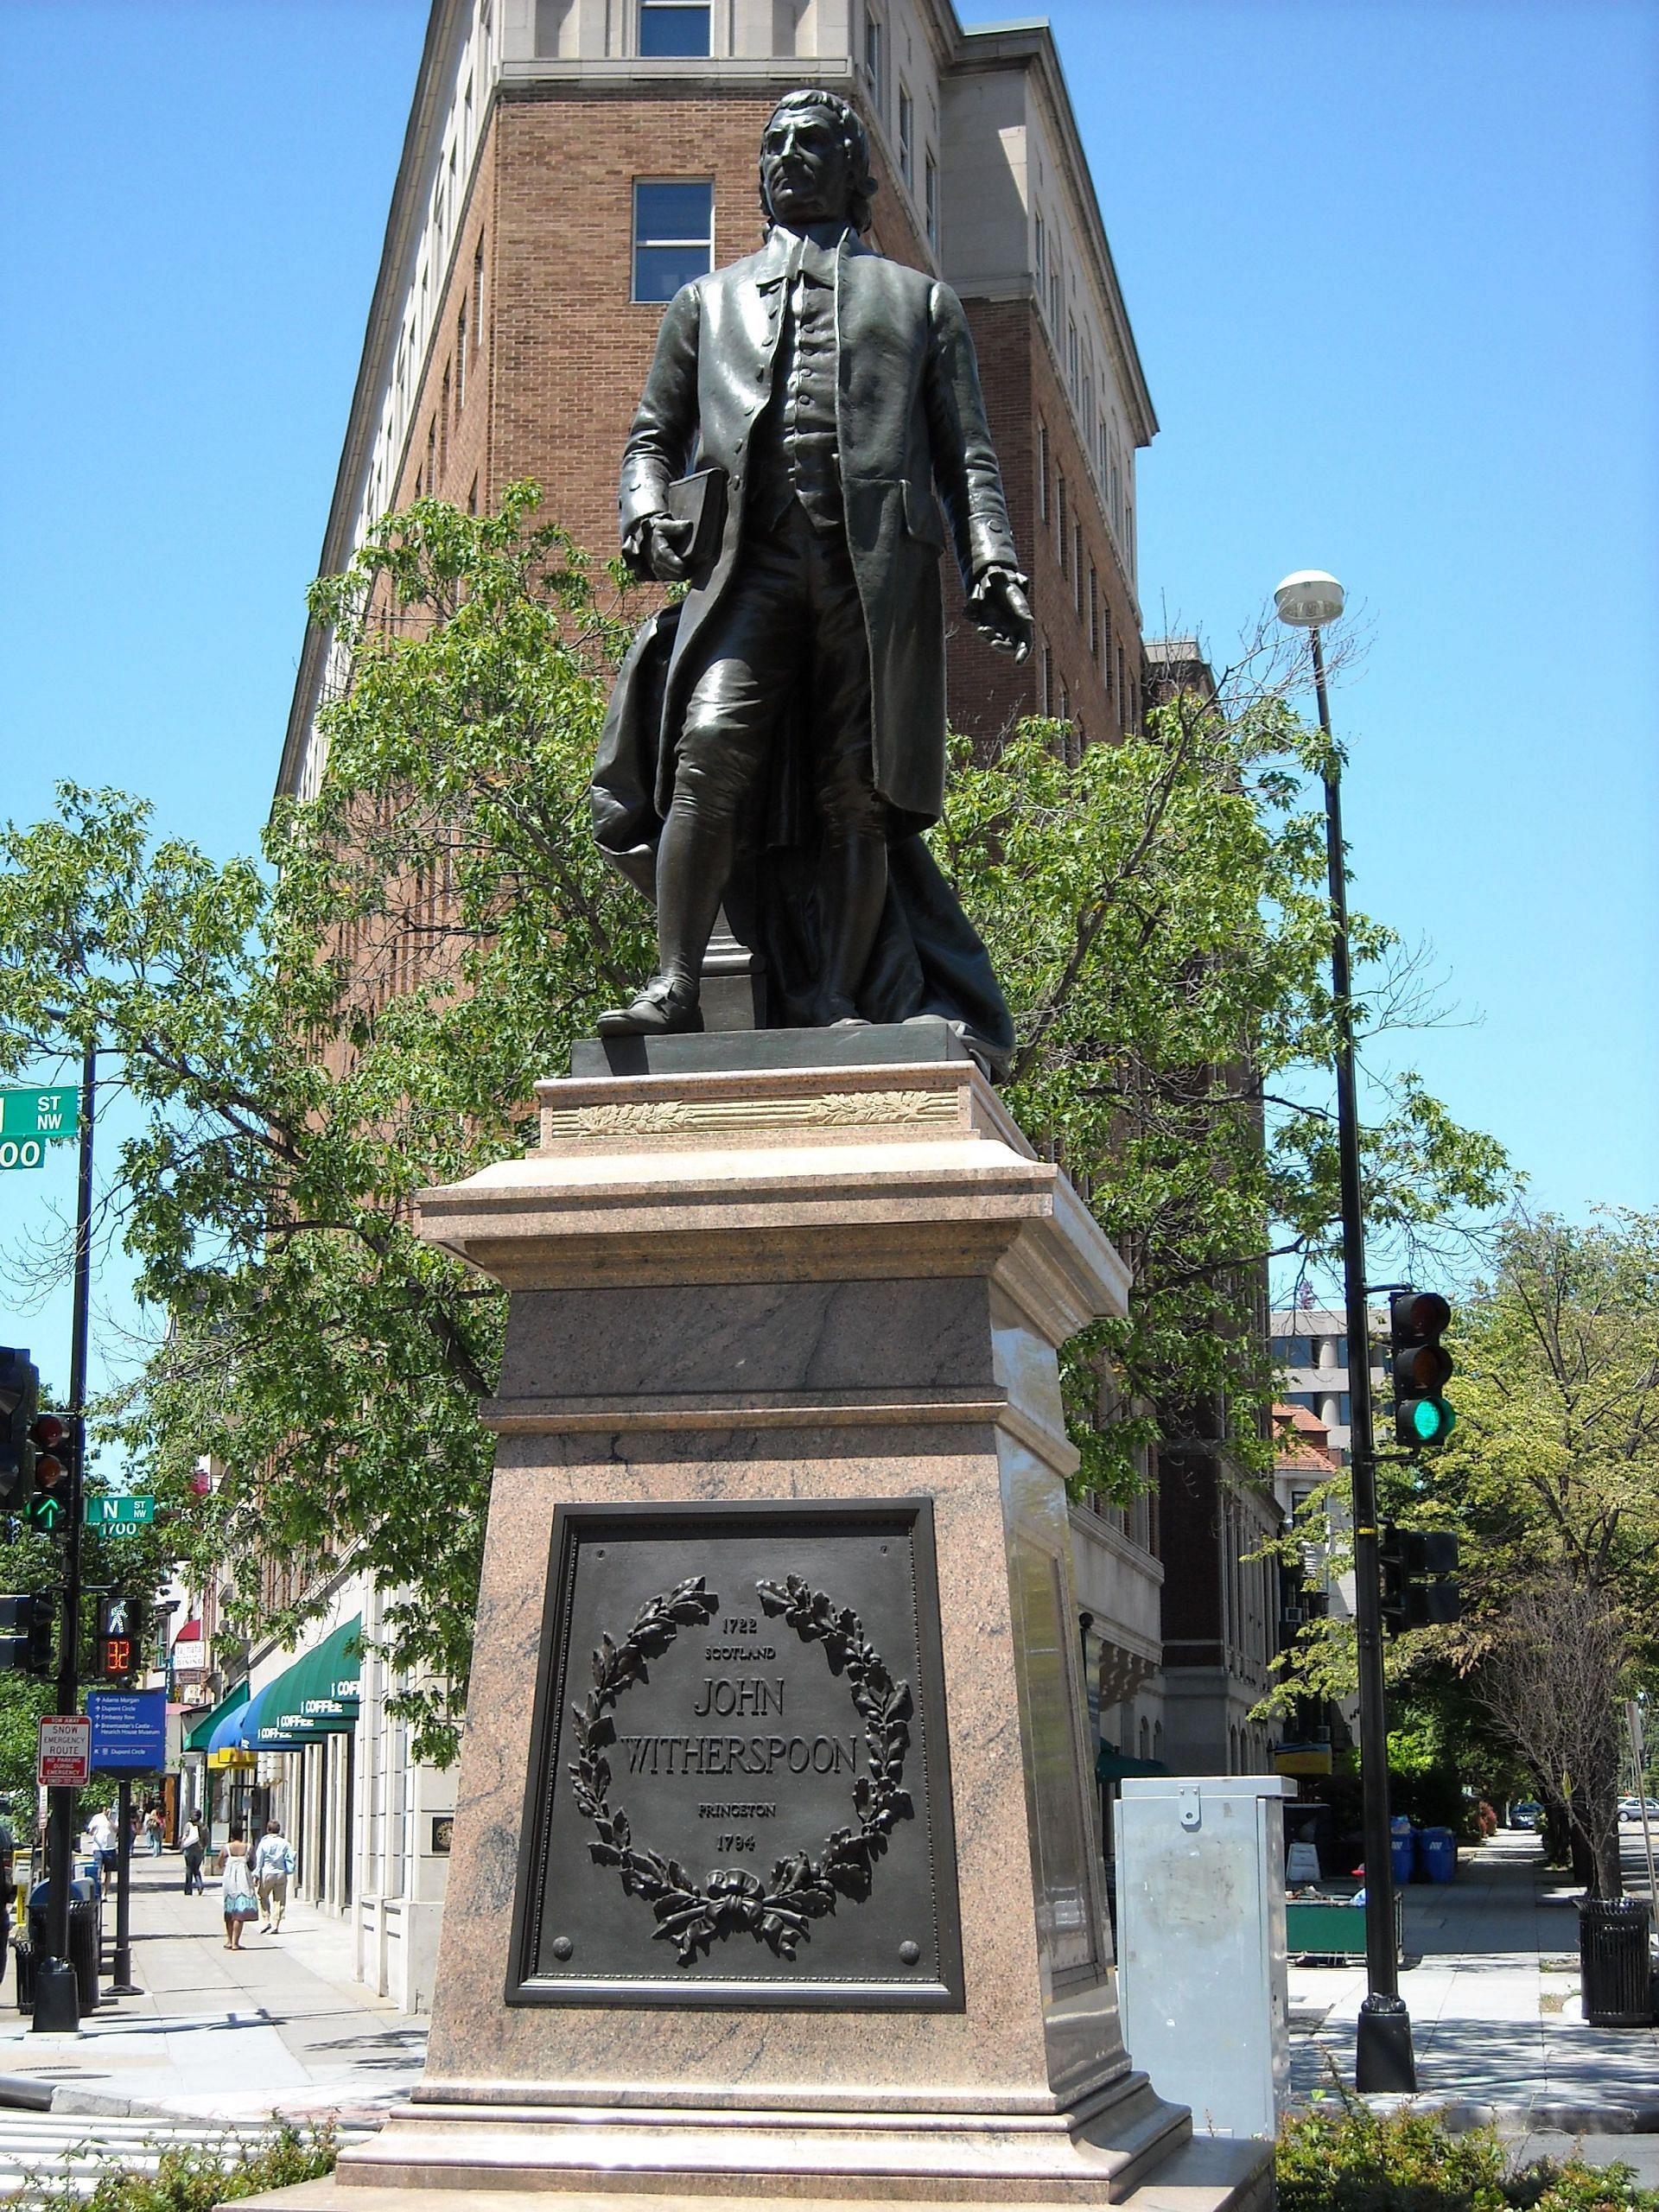 A statue of John Witherspoon in Washington D.C.